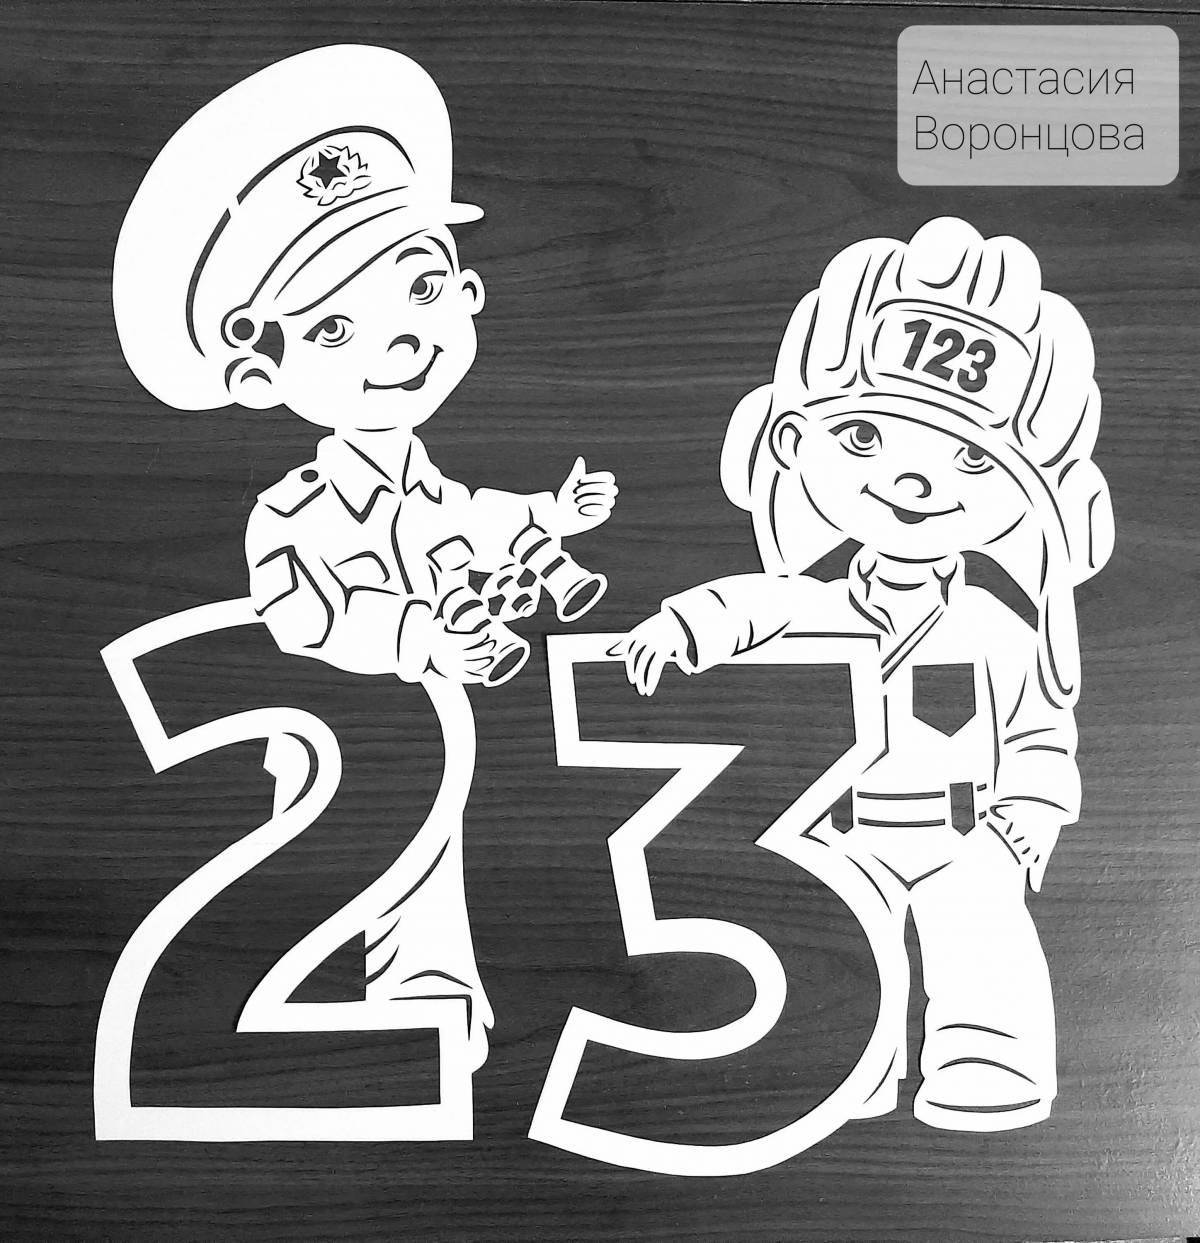 Fun coloring book from February 23rd